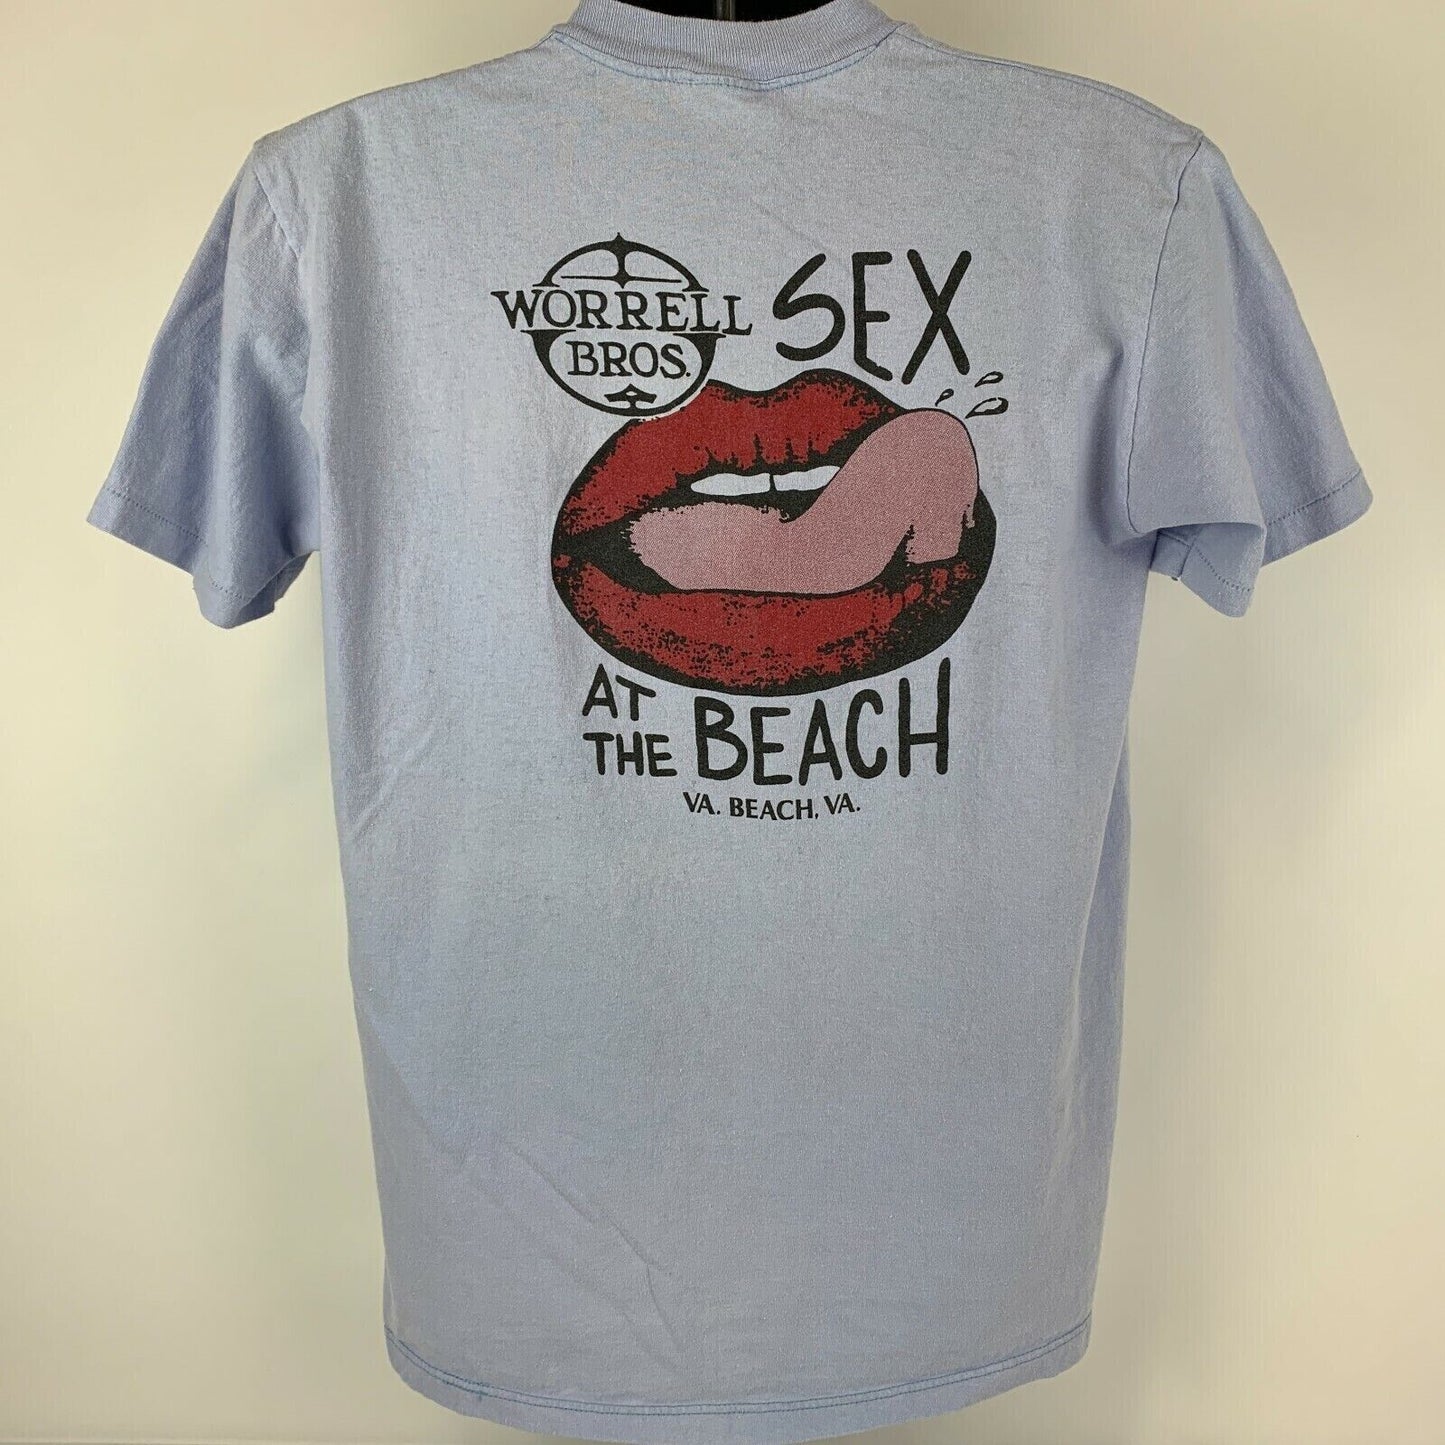 Worrell Bros Sex At The Beach Vintage 90s T Shirt Large Virginia Mens Blue